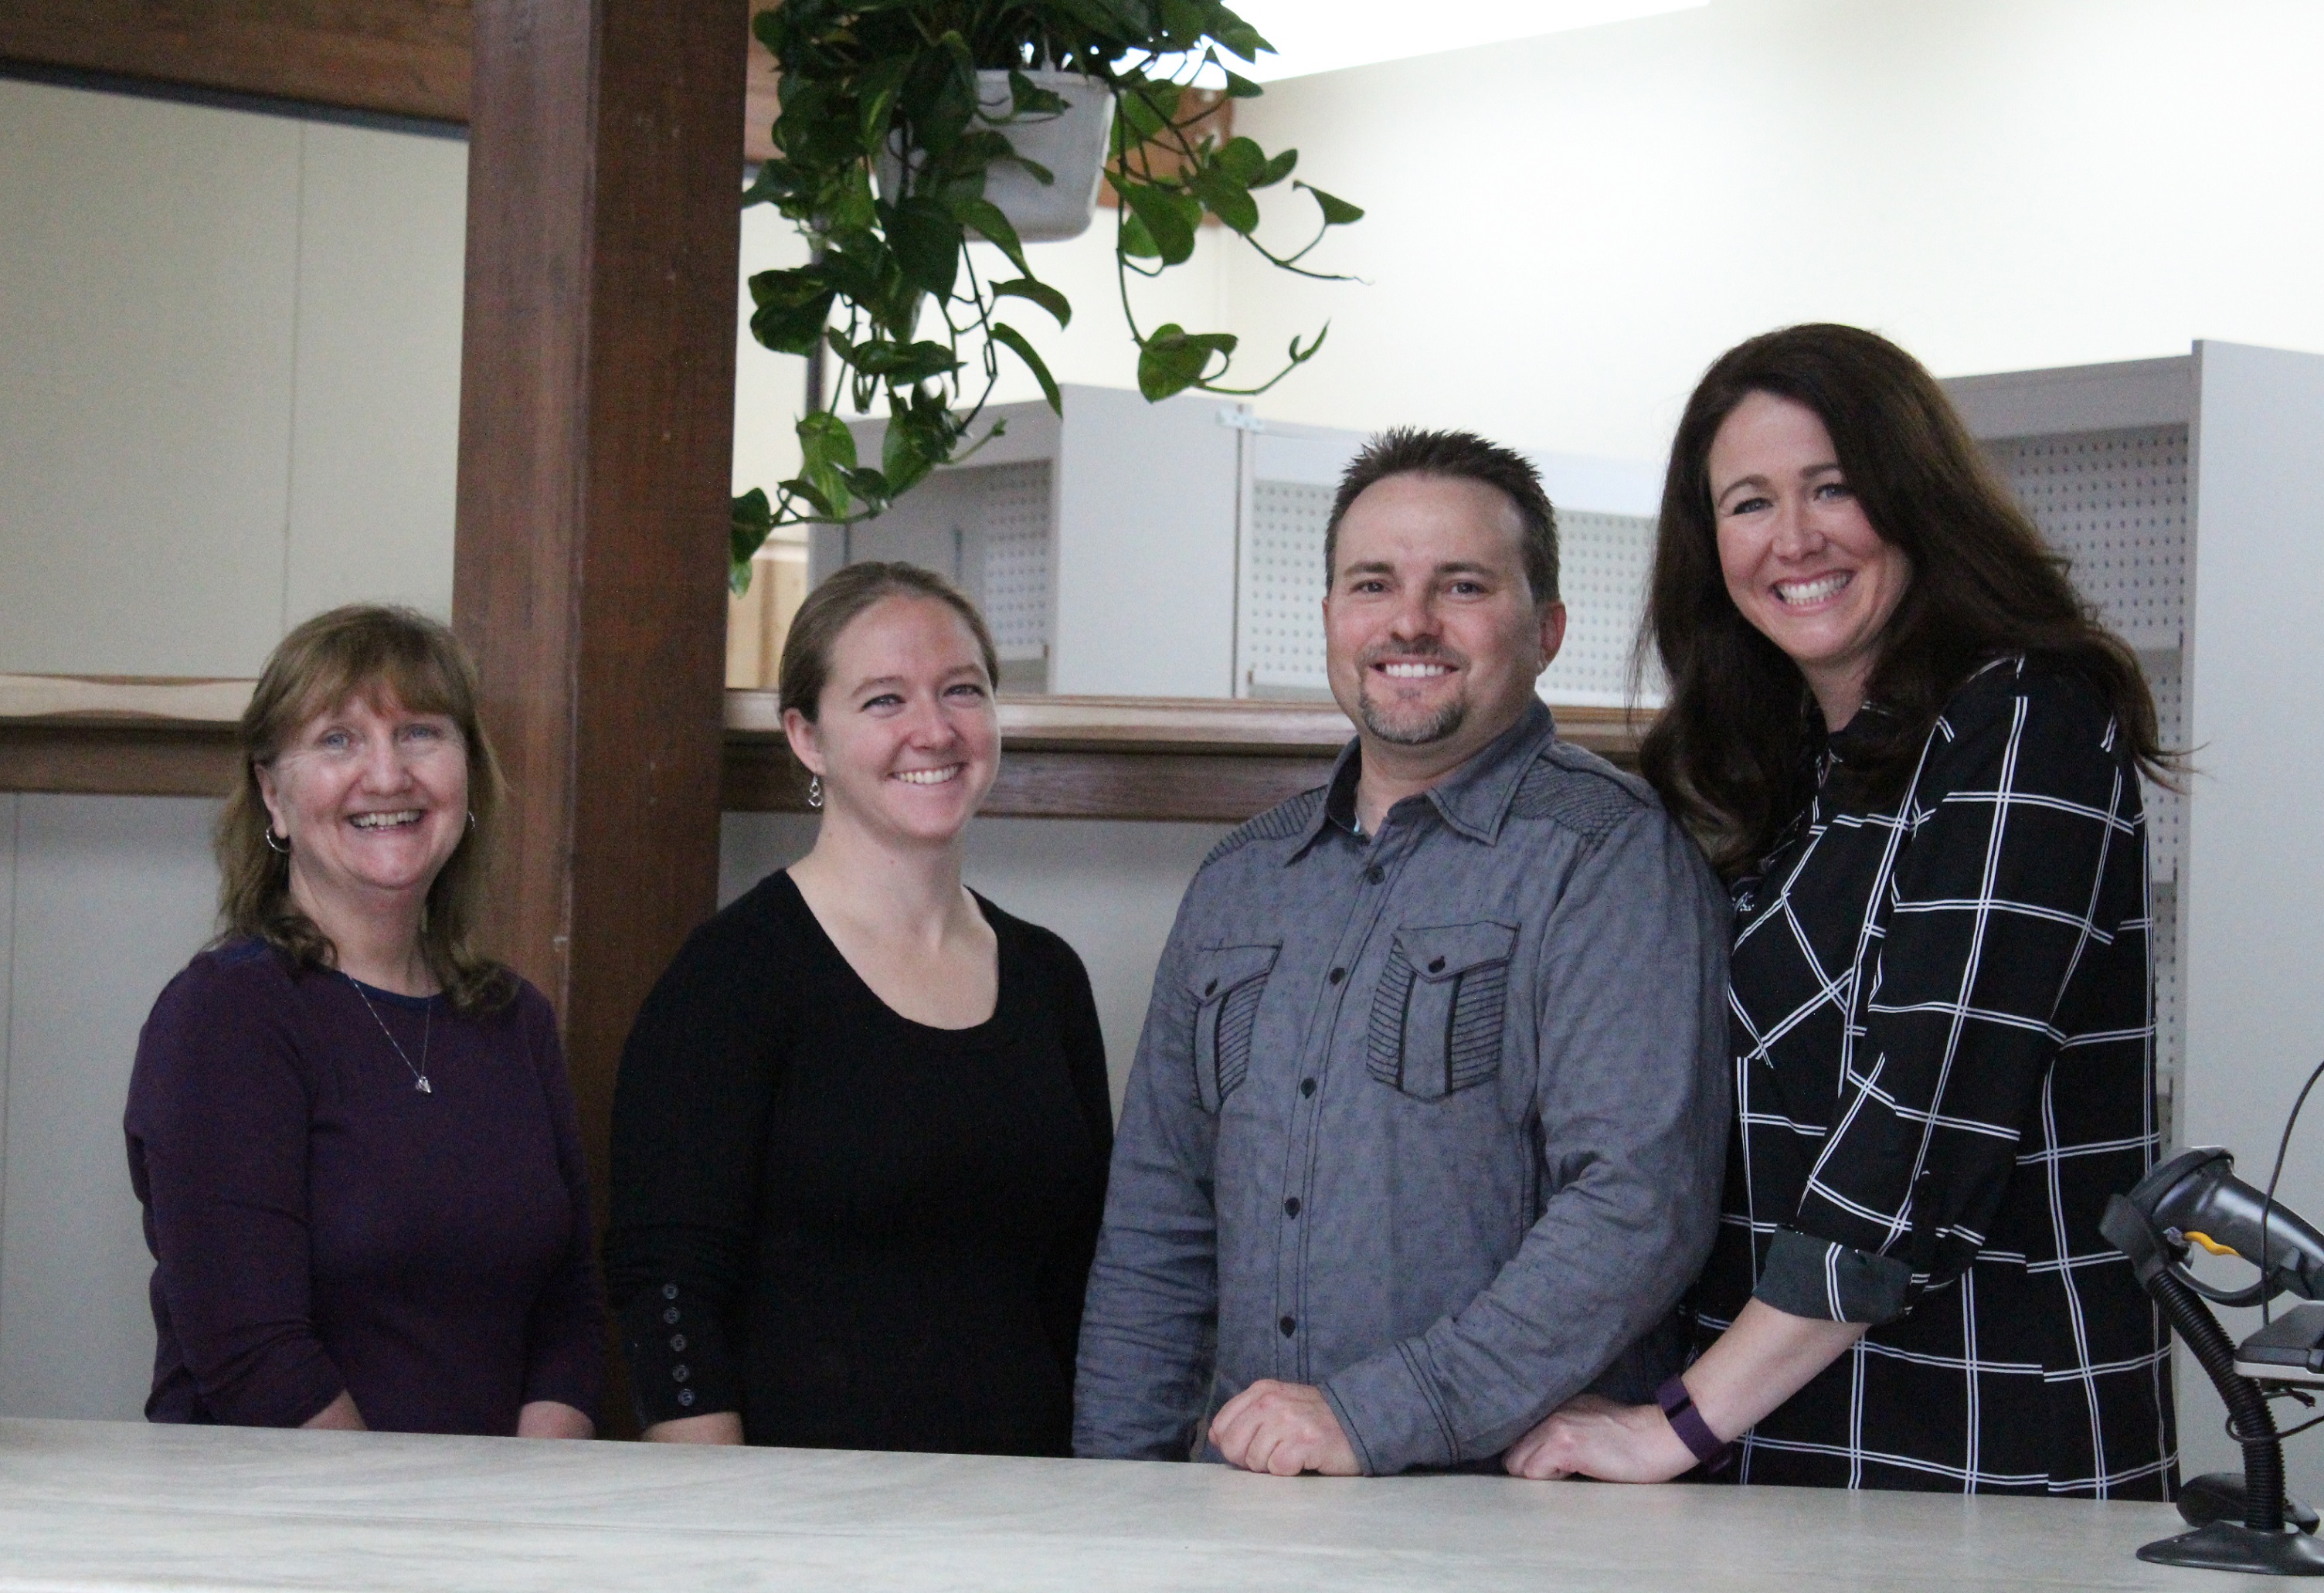 From left, Scotts Family Pharmacy technicians Diane Glanville and Krista Glanville and owners Nathan and Gina Scott pose for a photo at the pharmacy counter window. The pharmacy opened for business on Wednesday, Oct. 5.